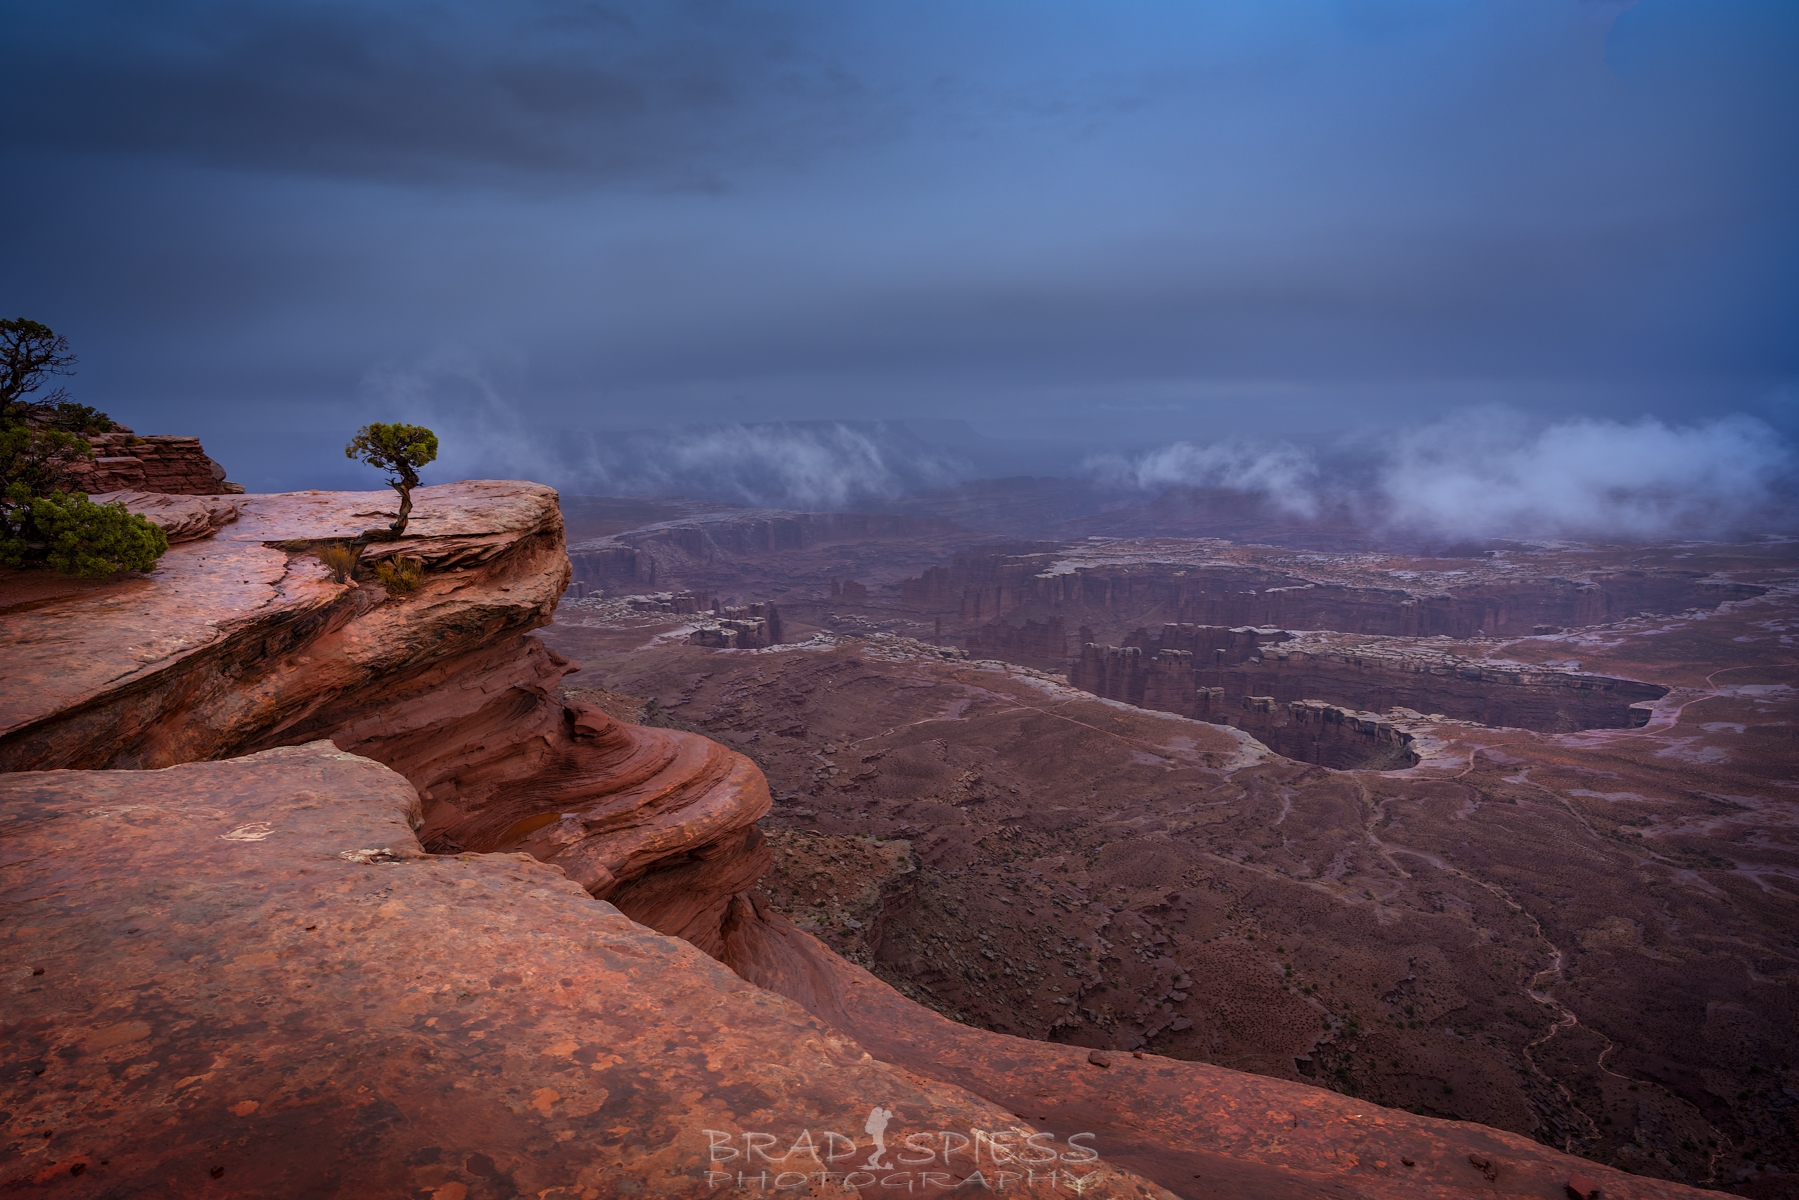 The clouds finally lifted giving us a clear view of the valley below at Grand View point in Moab.